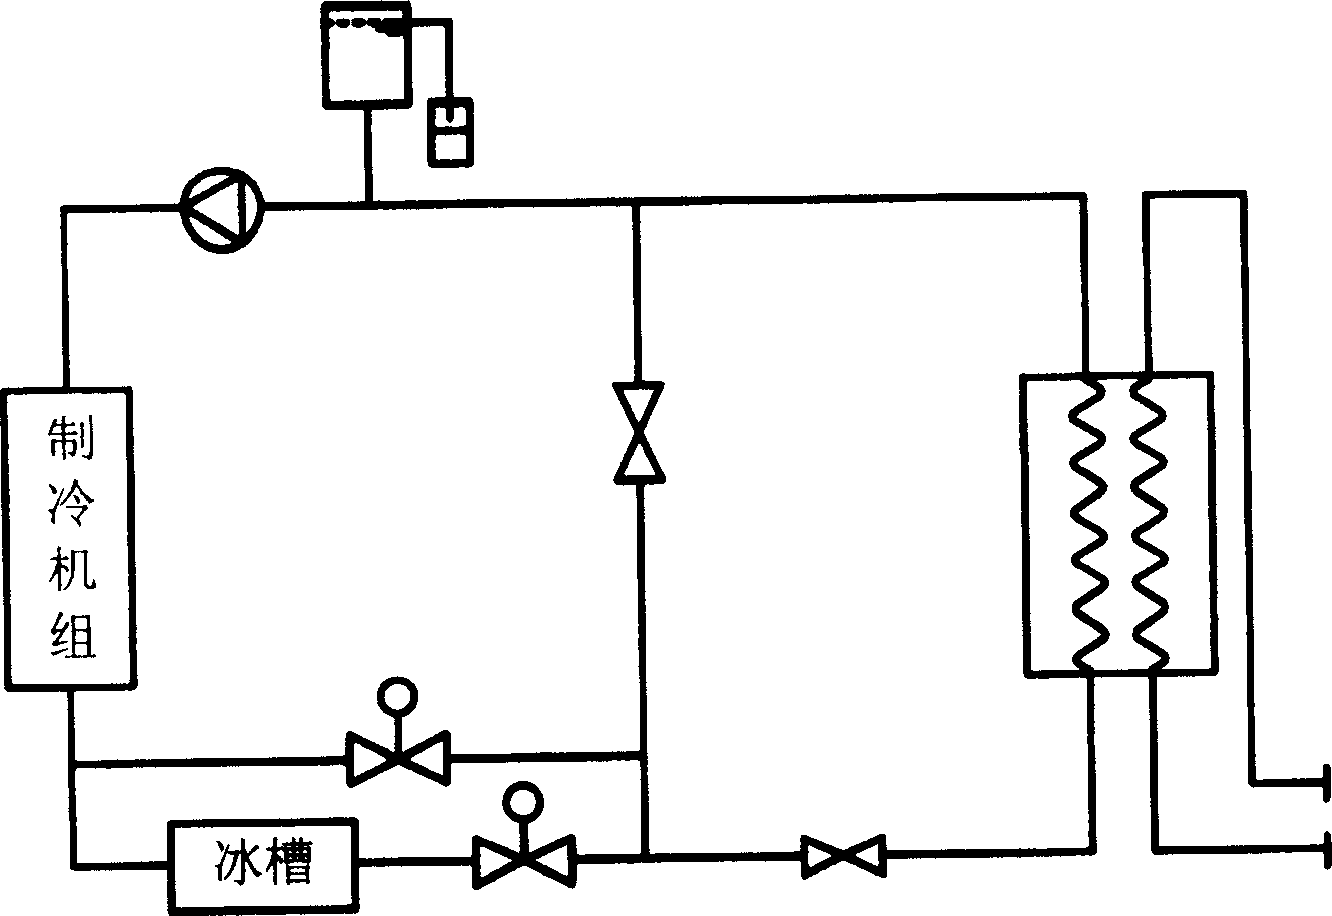 Ice smelting and cold storage device in parallel mono heat exchanger